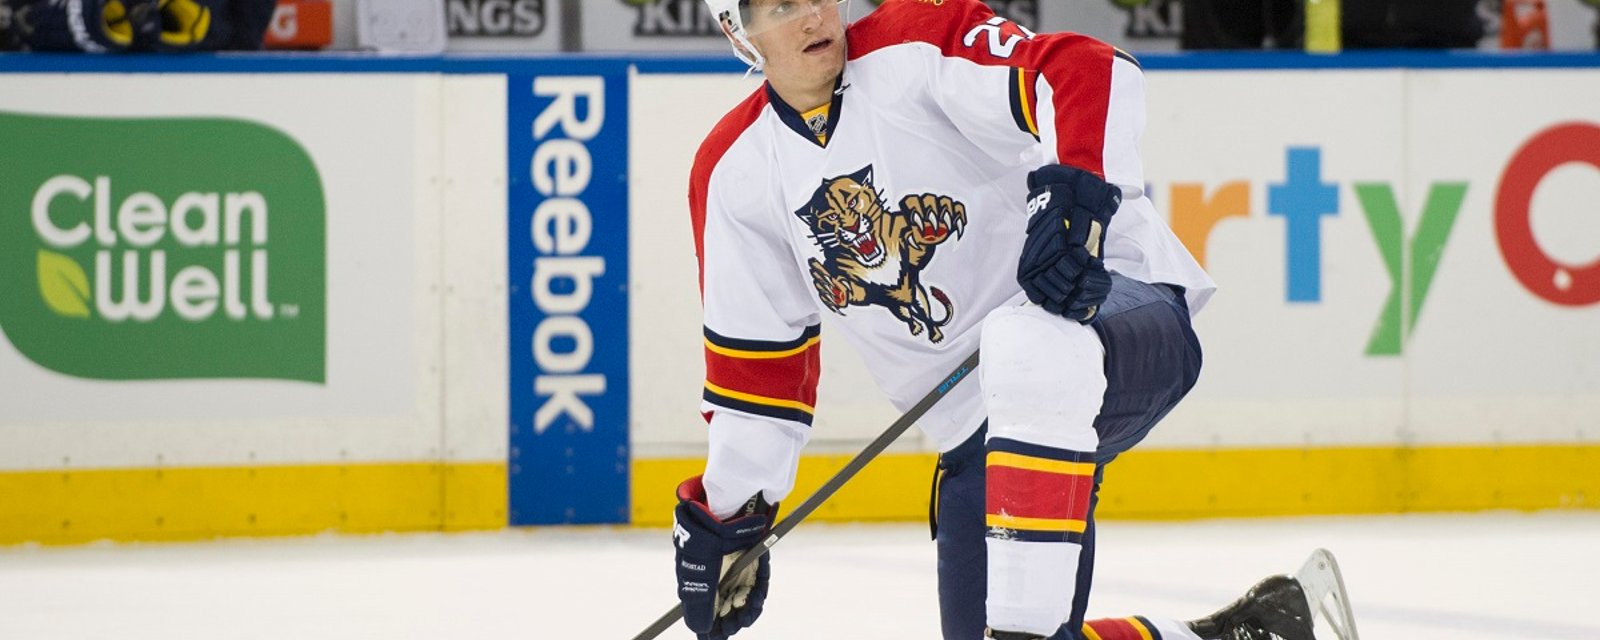 Bjugstad suffers another major injury, will miss significant time.